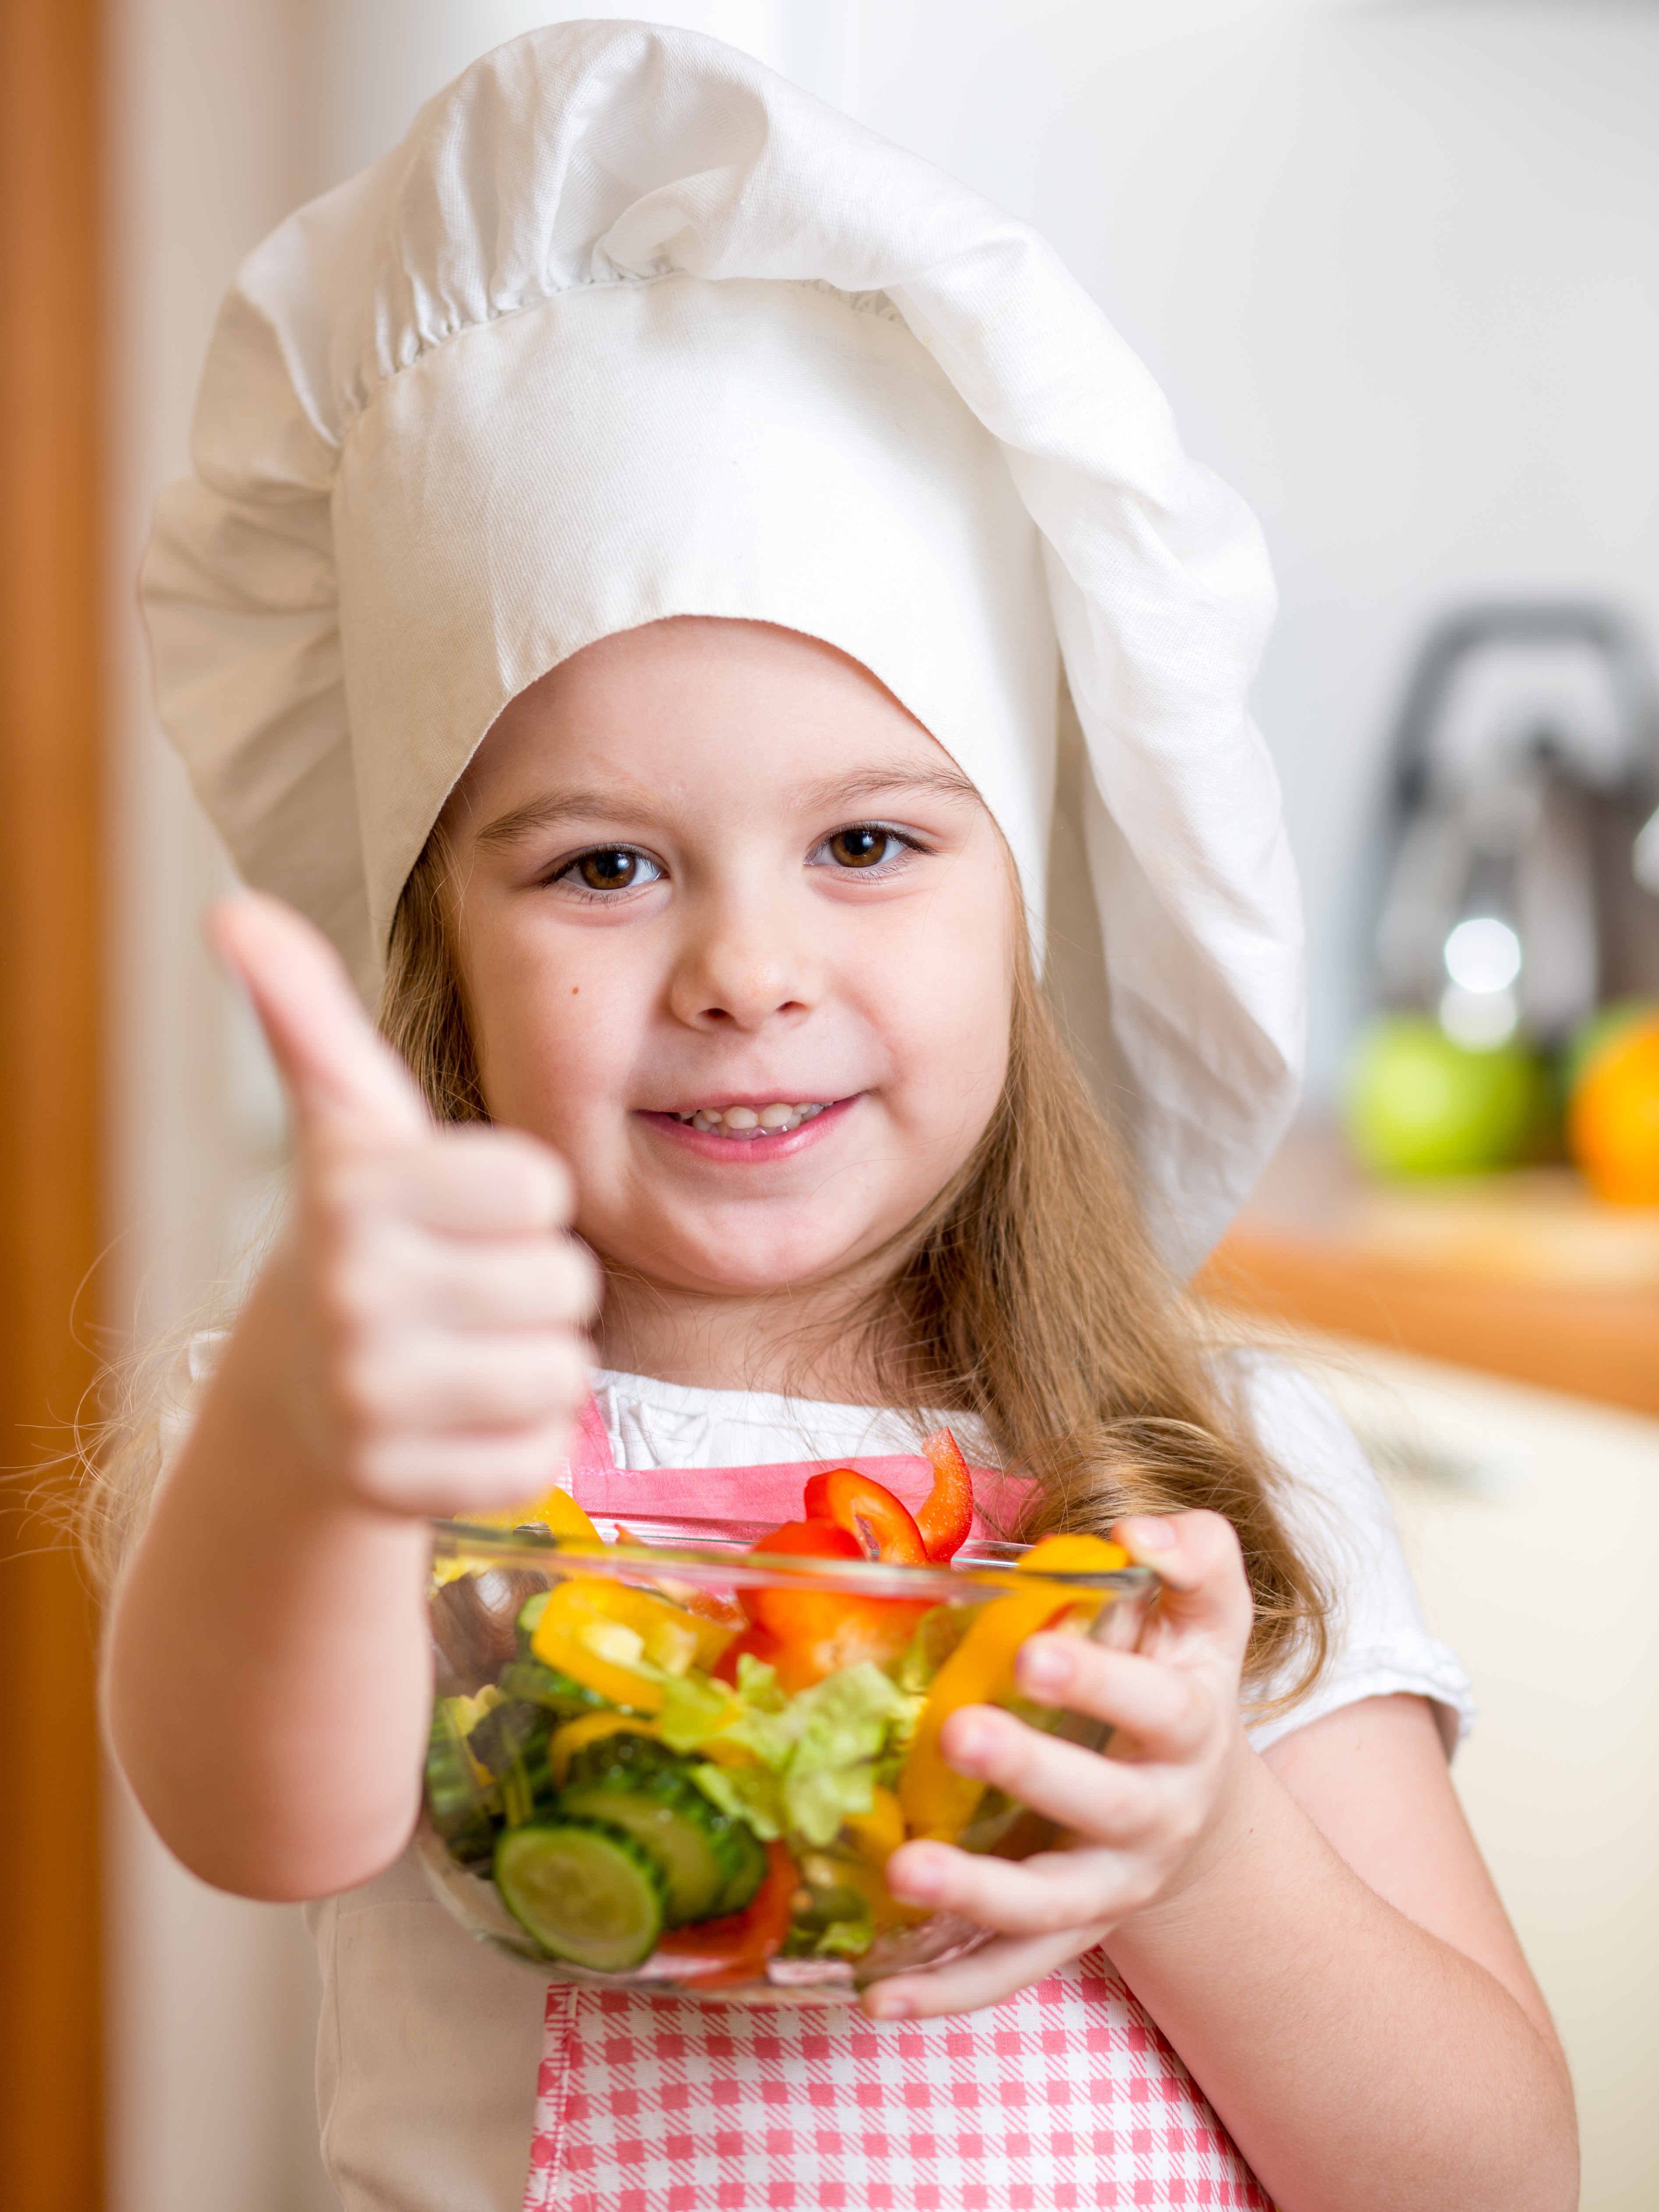 A young girl wearing a white chefs hat while holding a bowl of vegetables and giving a 'thumbs-up' sign.